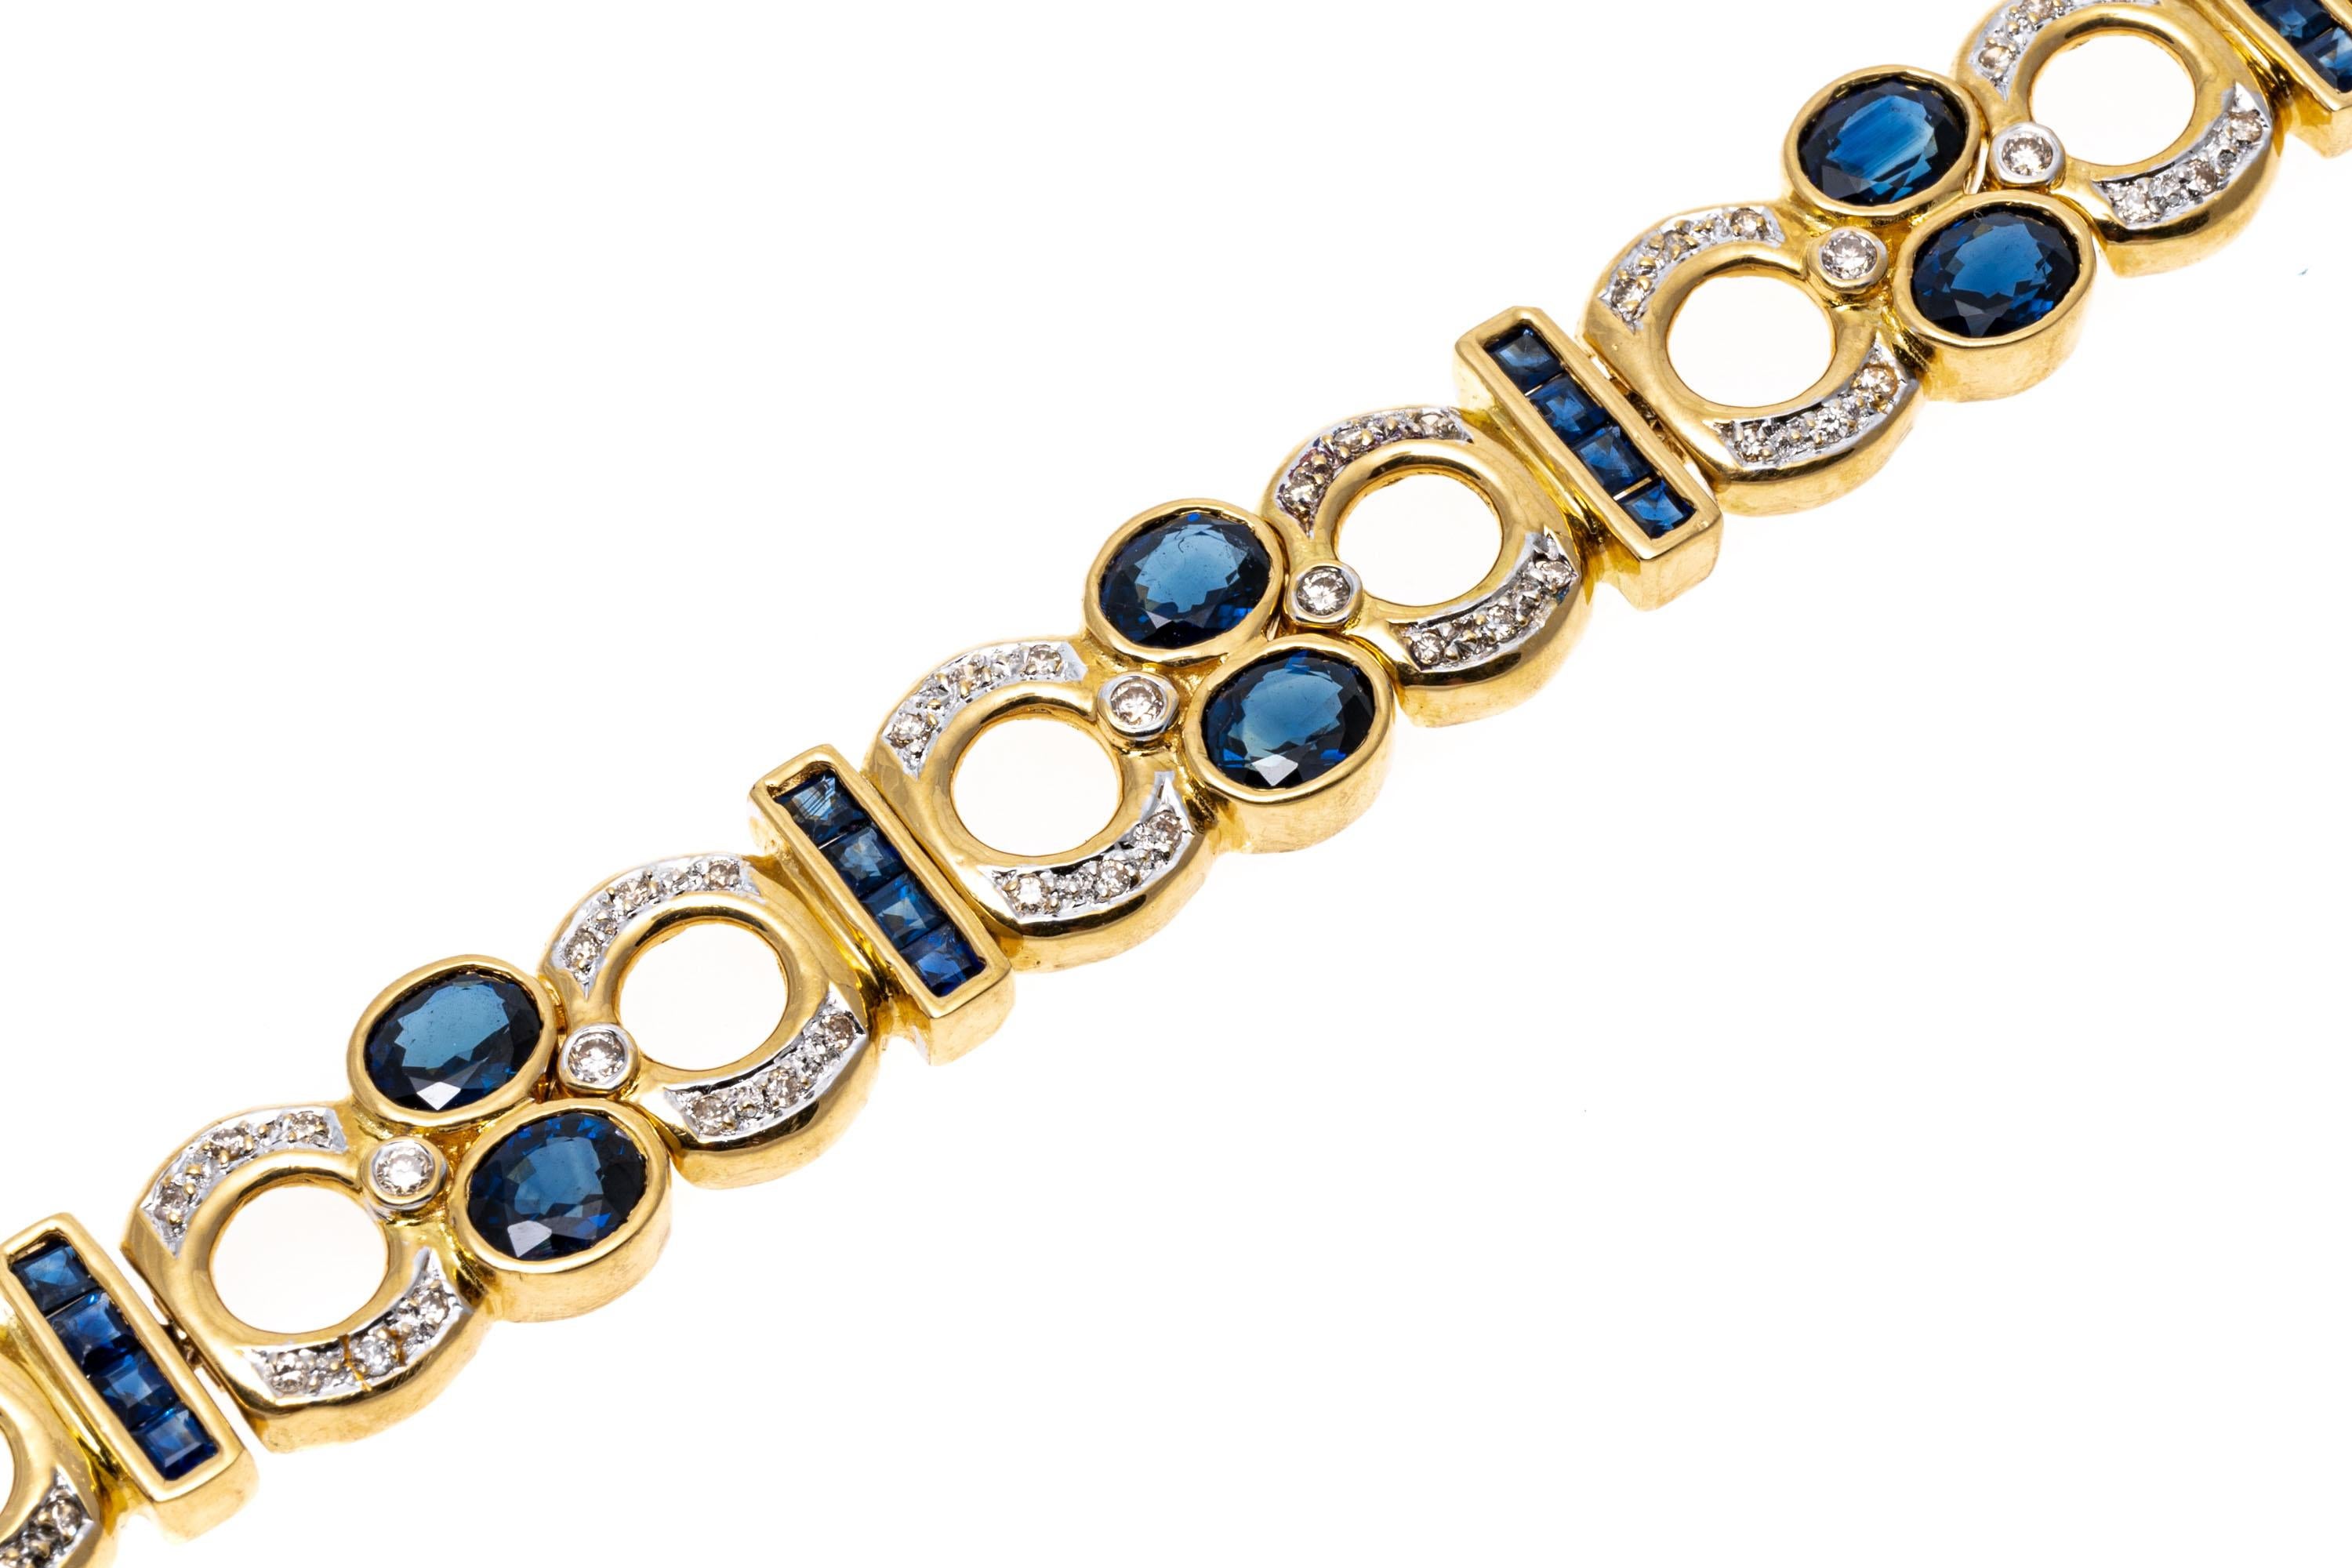 18k yellow gold bracelet. This striking bracelet features open round faceted diamond set links approximately 0.47 TCW. Alternating with the diamond links are vertical bars of calibre cut, channel set blue sapphires, approximately 1.68 TCW, which